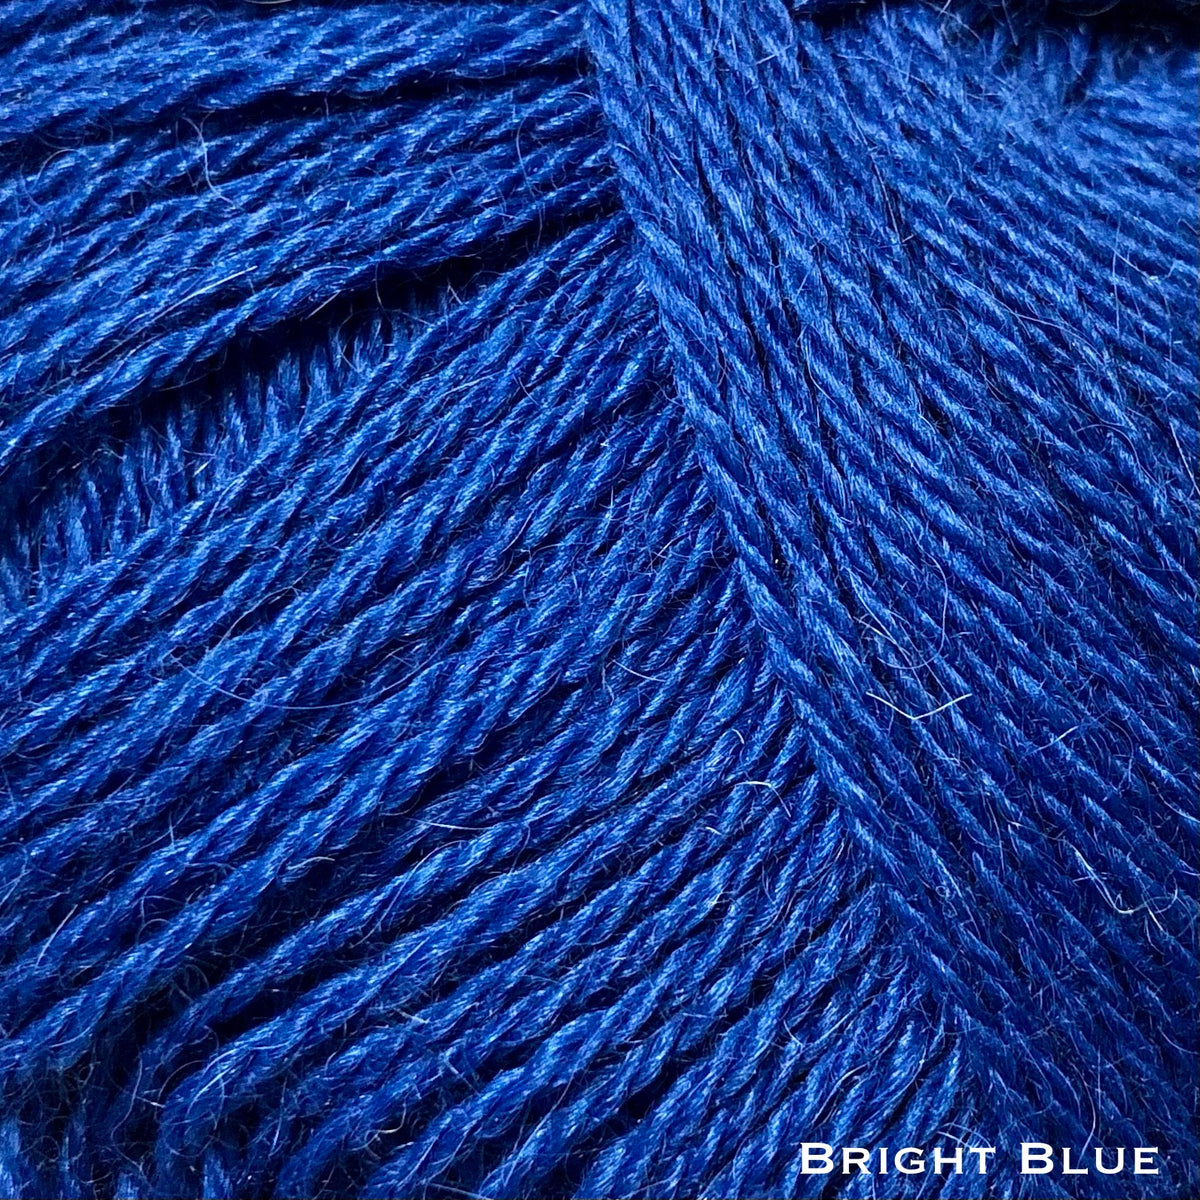 bright blue sport weight alpaca wool natural yarn for knitting and crochet